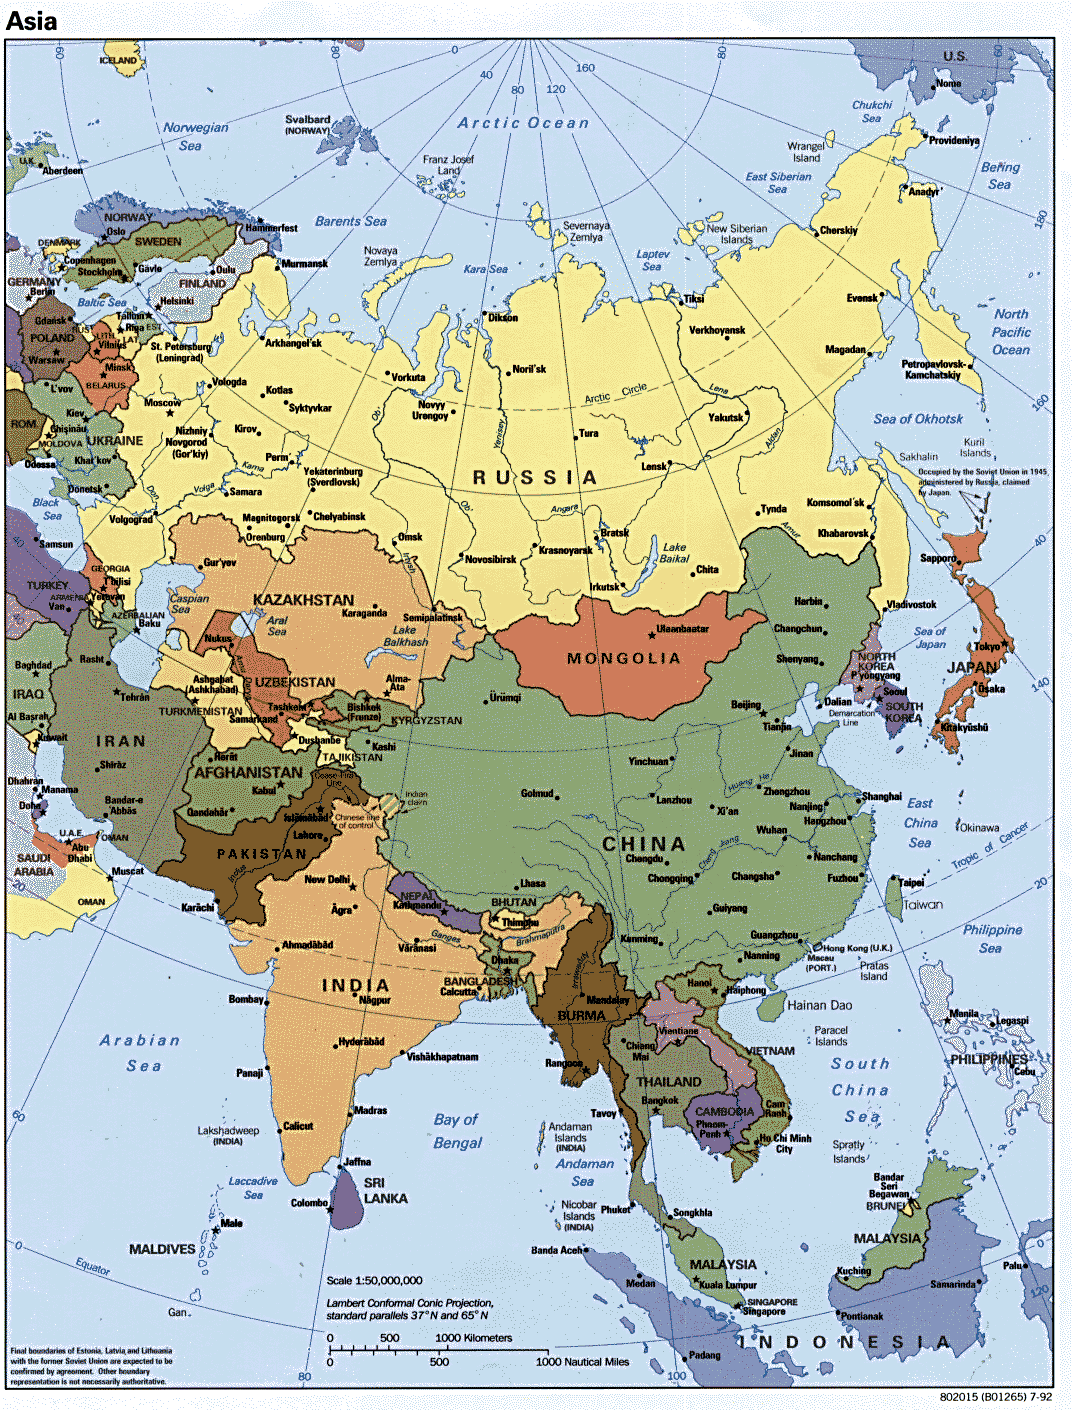 1Up Travel - Maps of Asia Continent. Asia [Political Map] 1992 (326K)